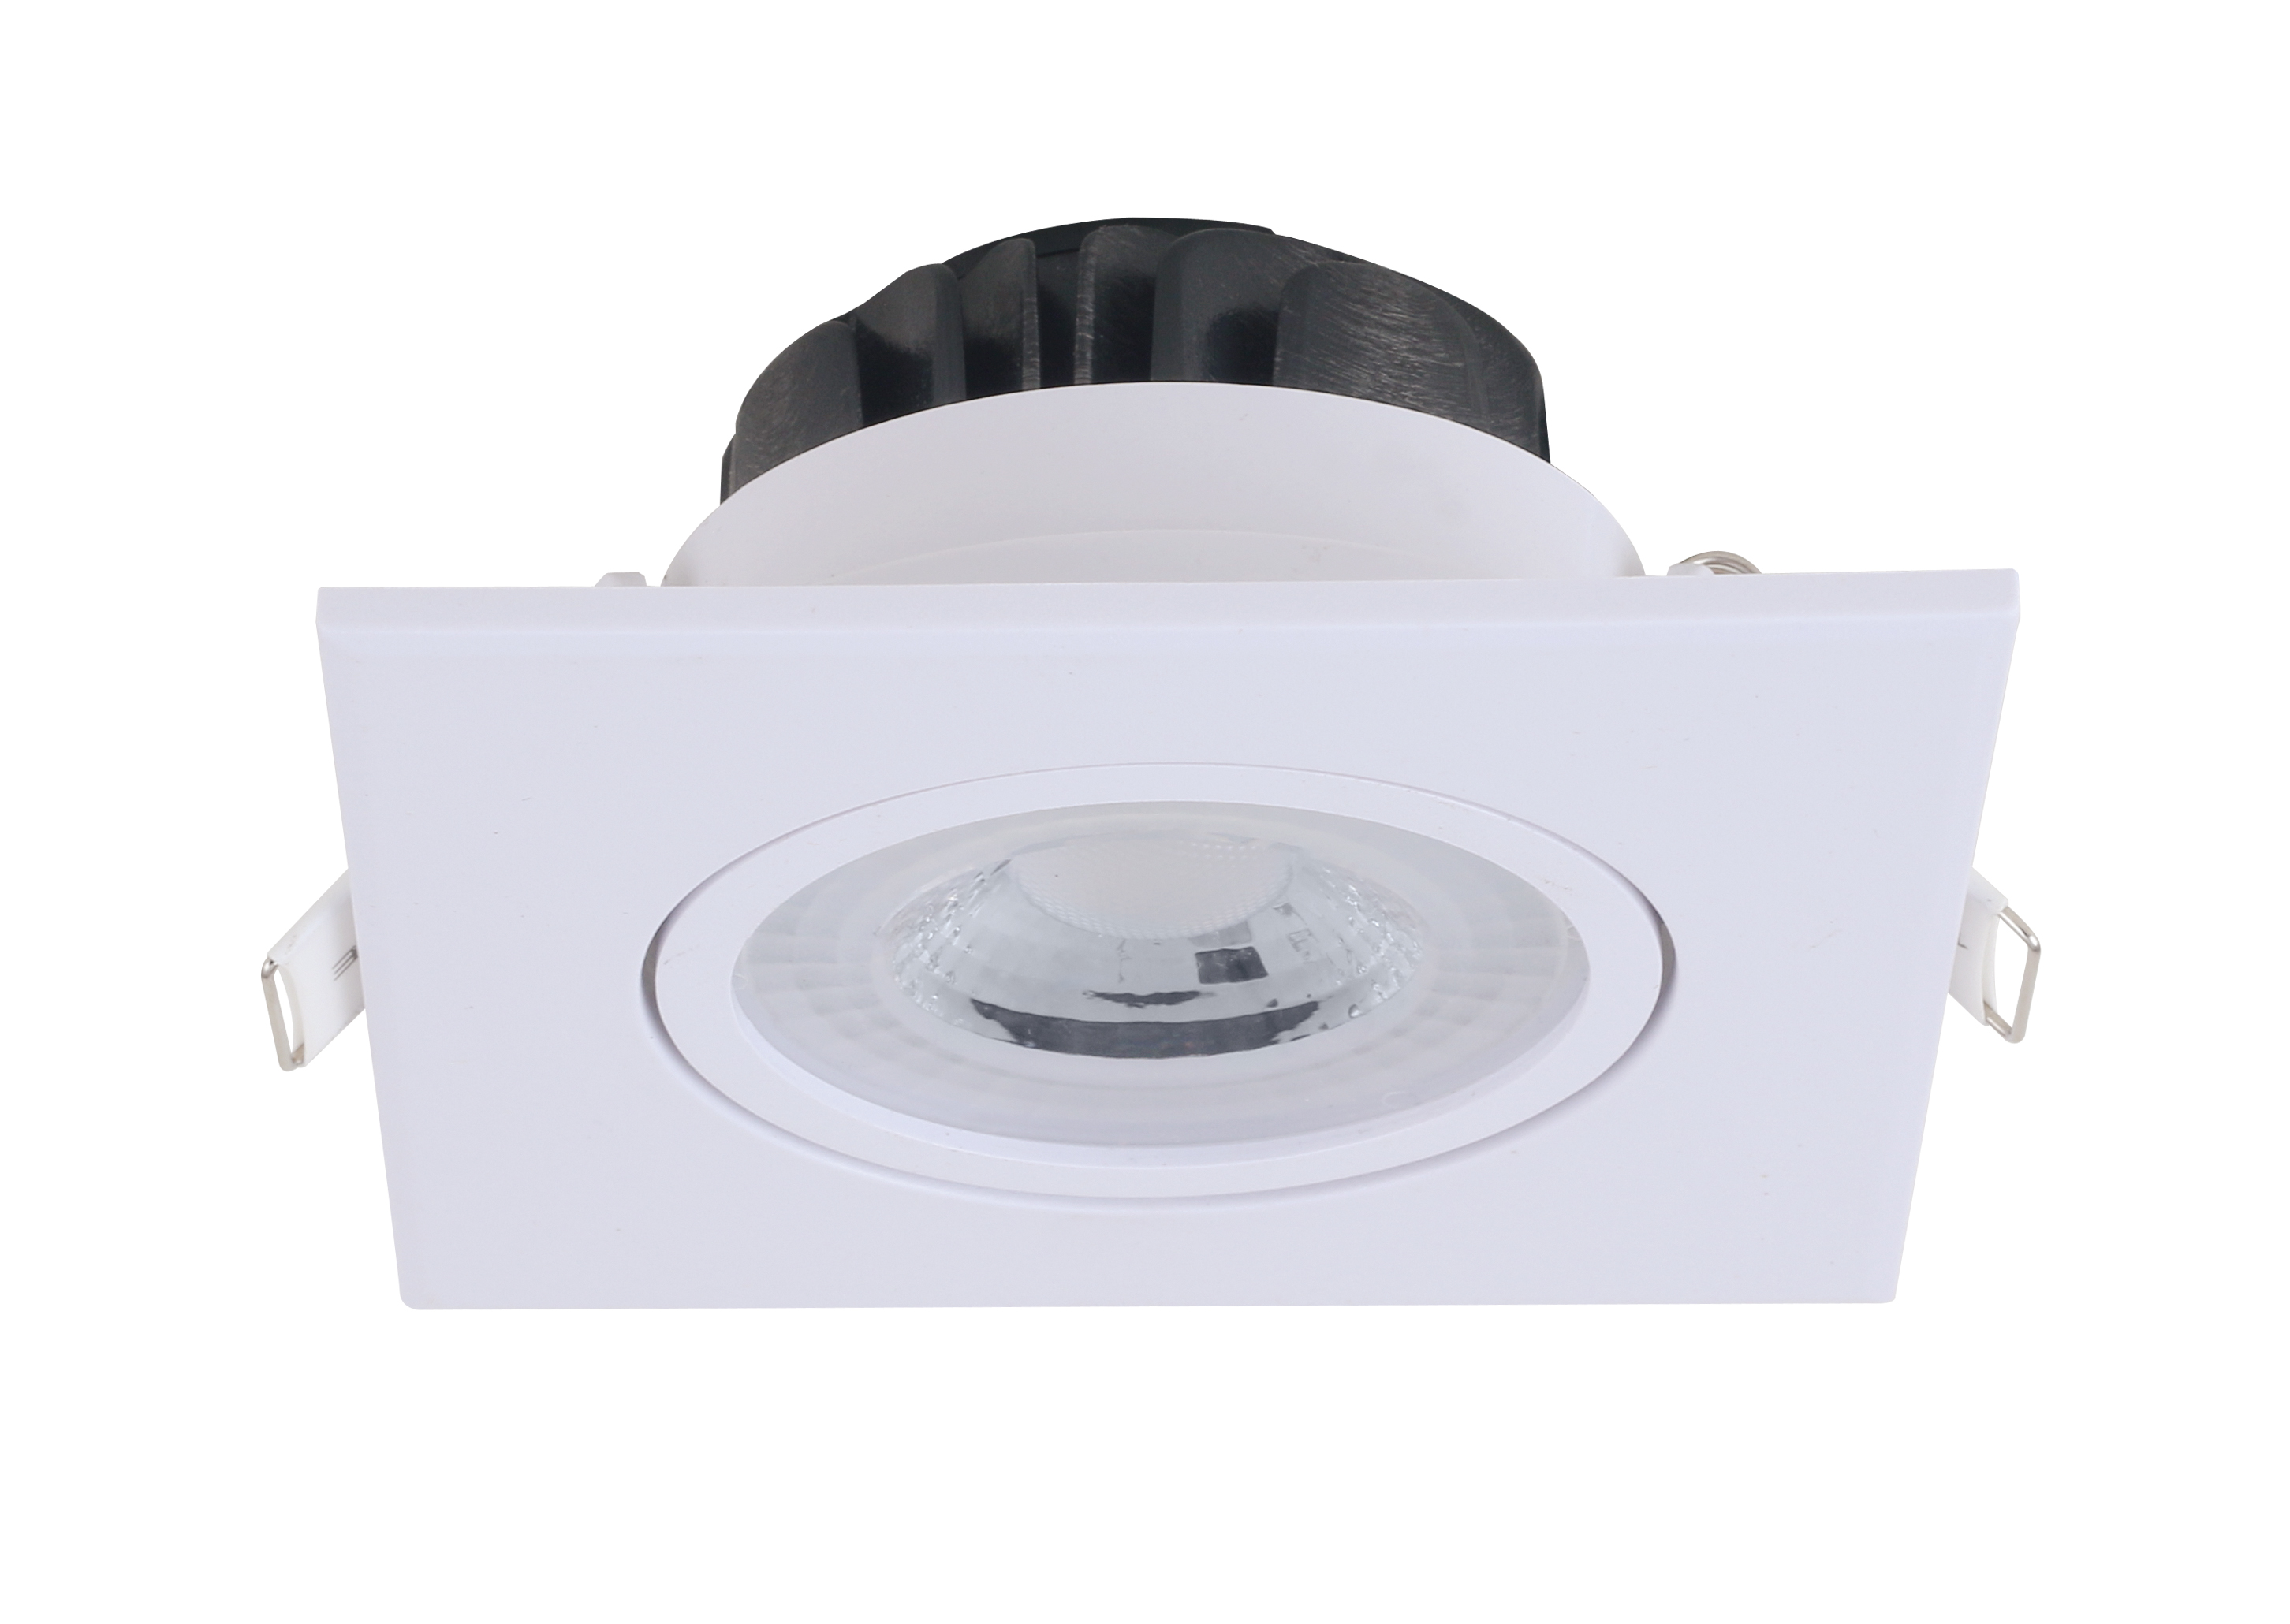 New Design Well-selling 5W 10W 15W Plastic SMD LED Ceiling Light